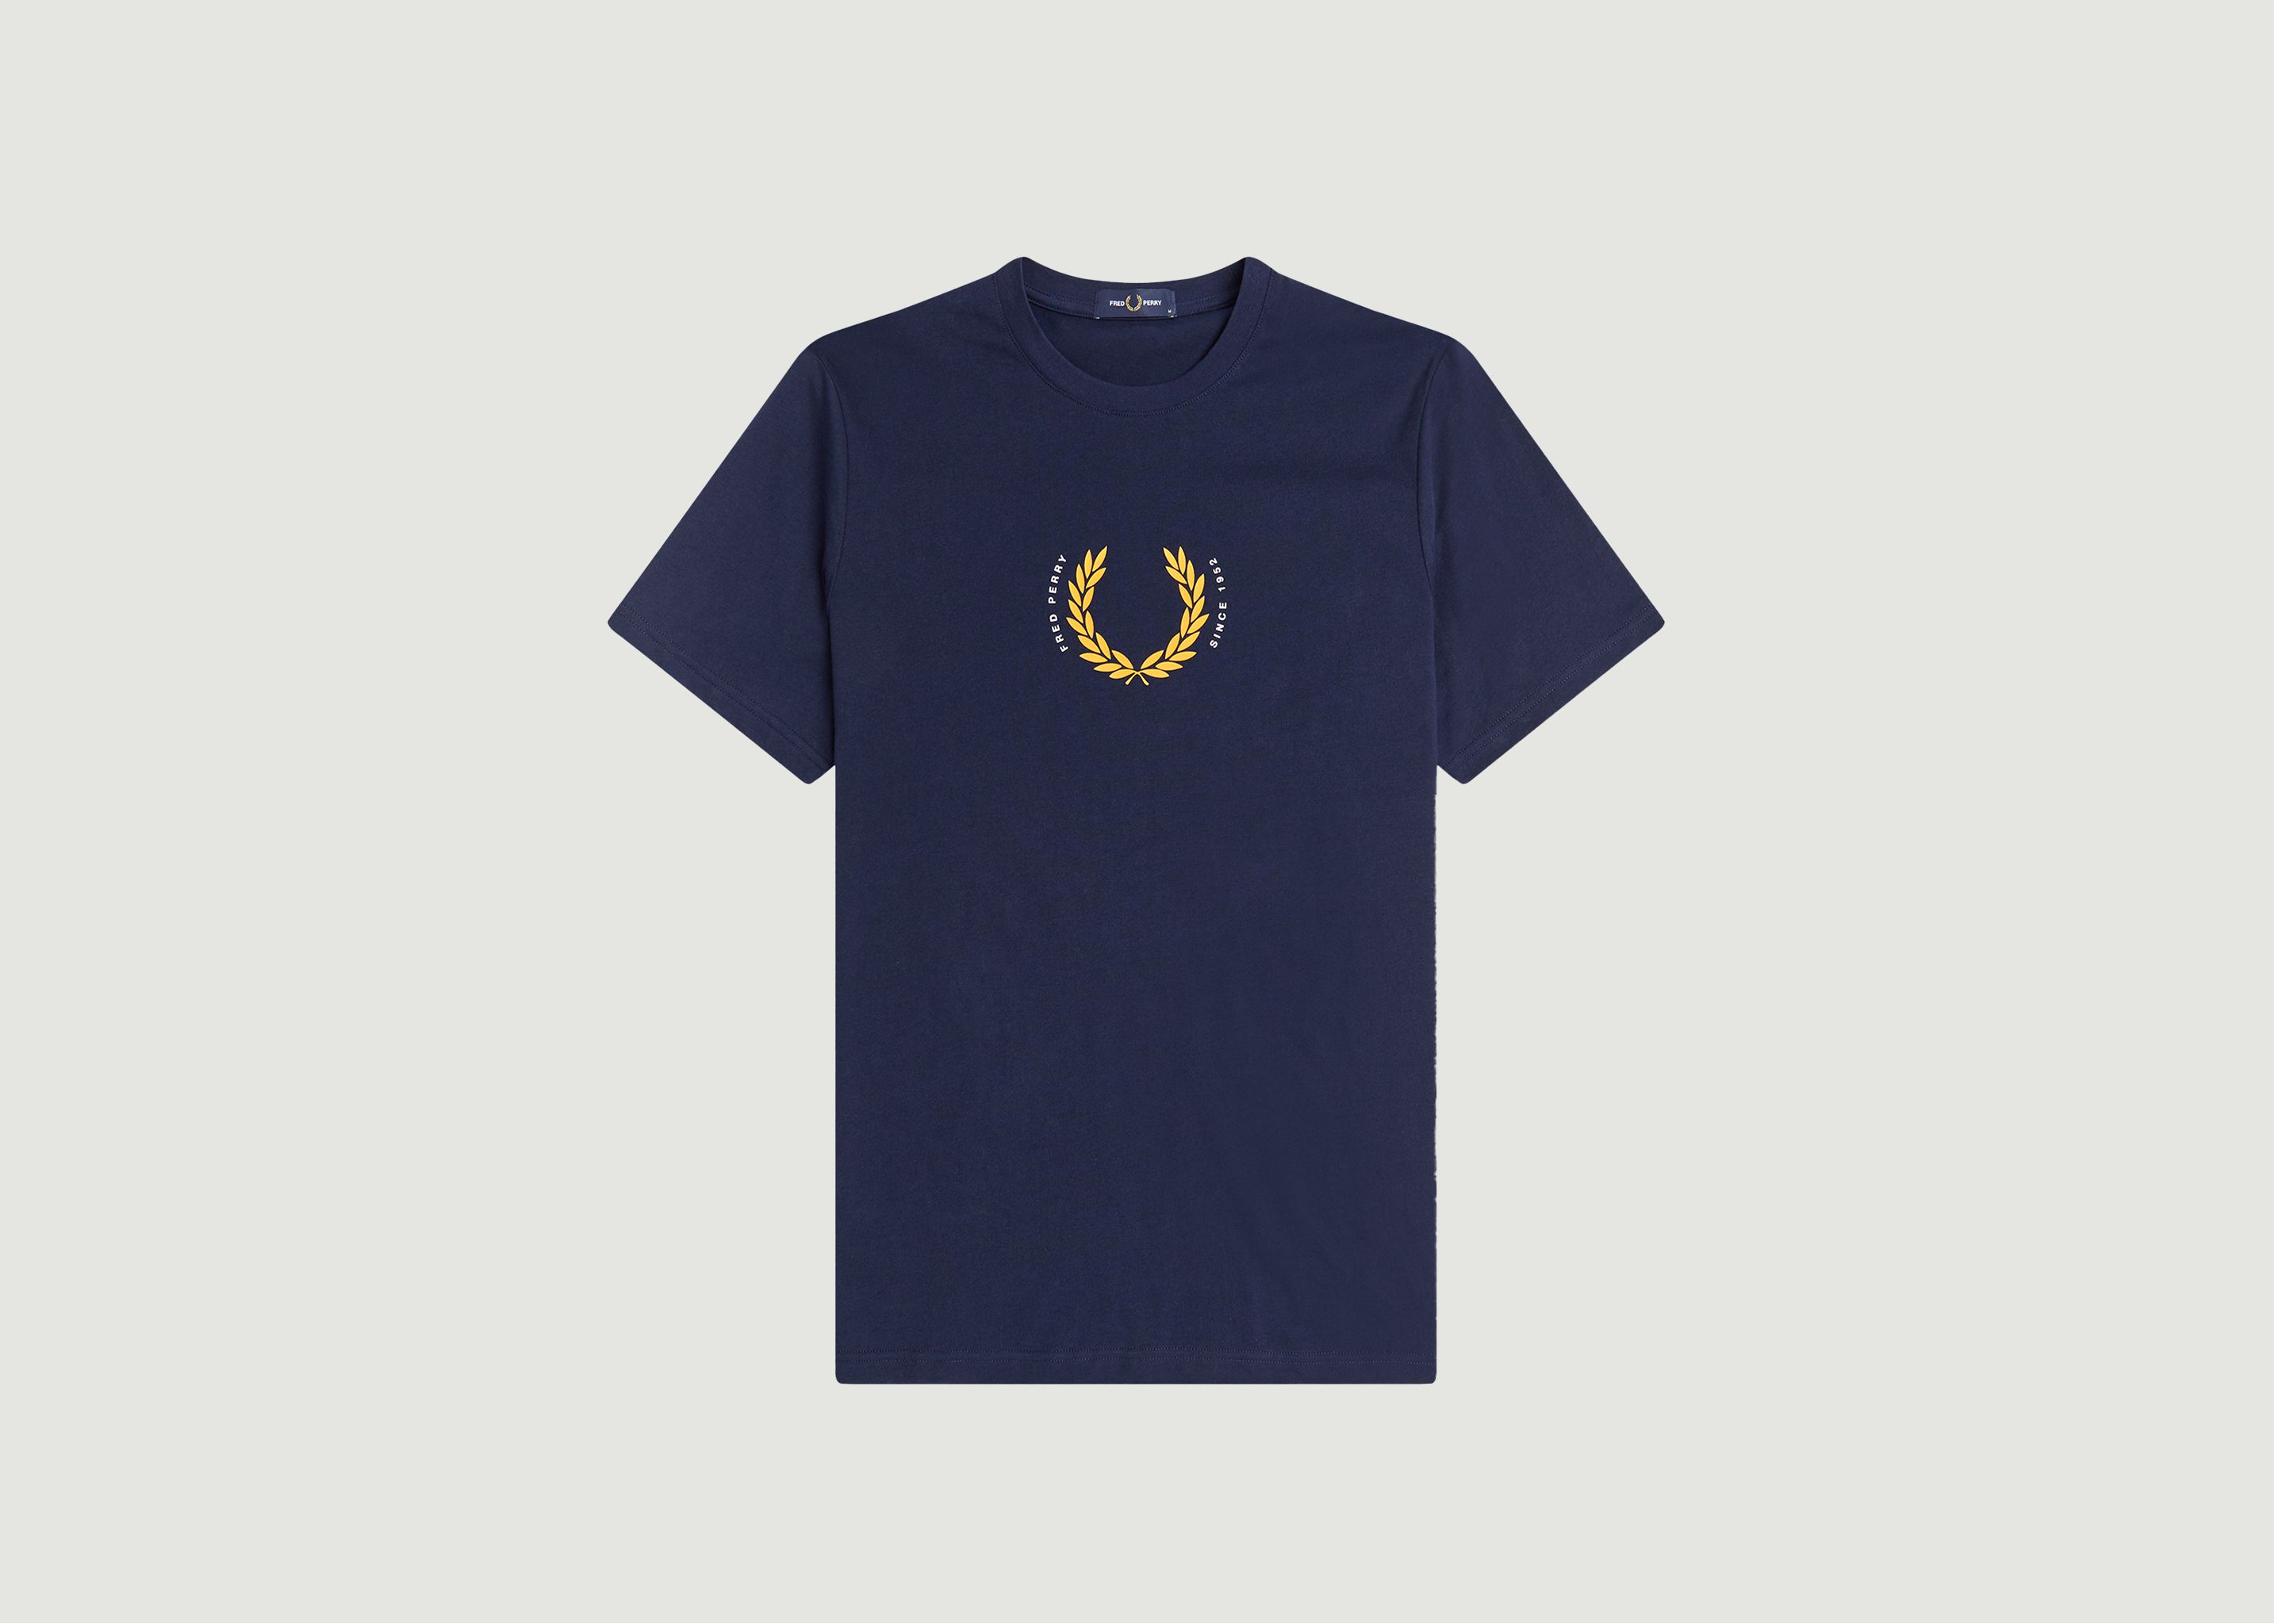 Laurel wreath T-shirt - Fred Perry